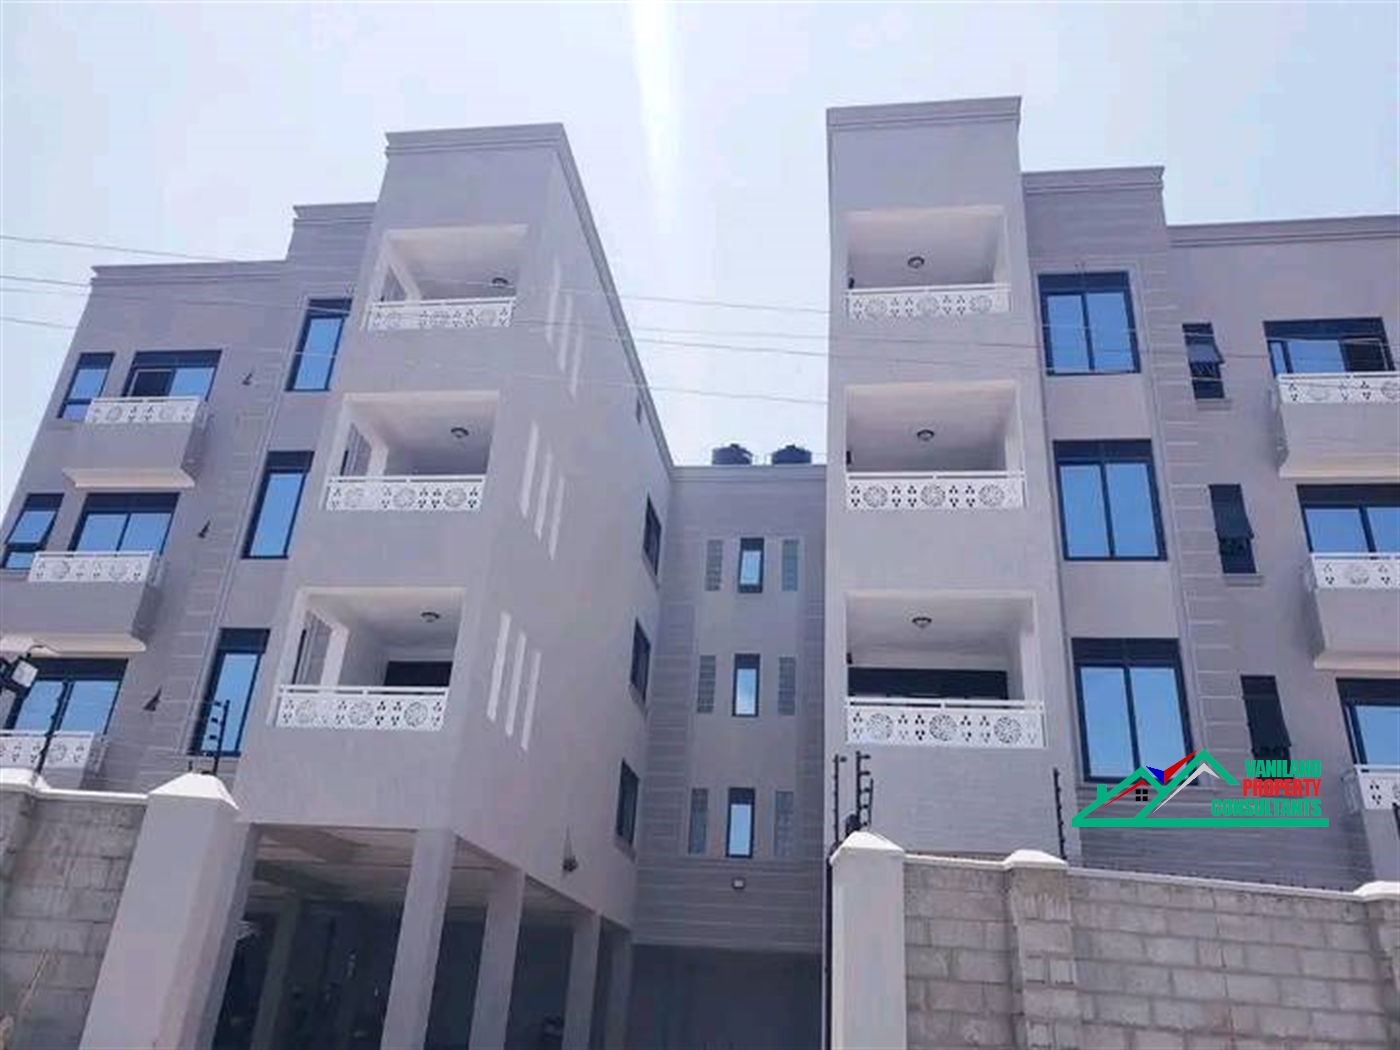 Apartment for rent in Nsambya Wakiso